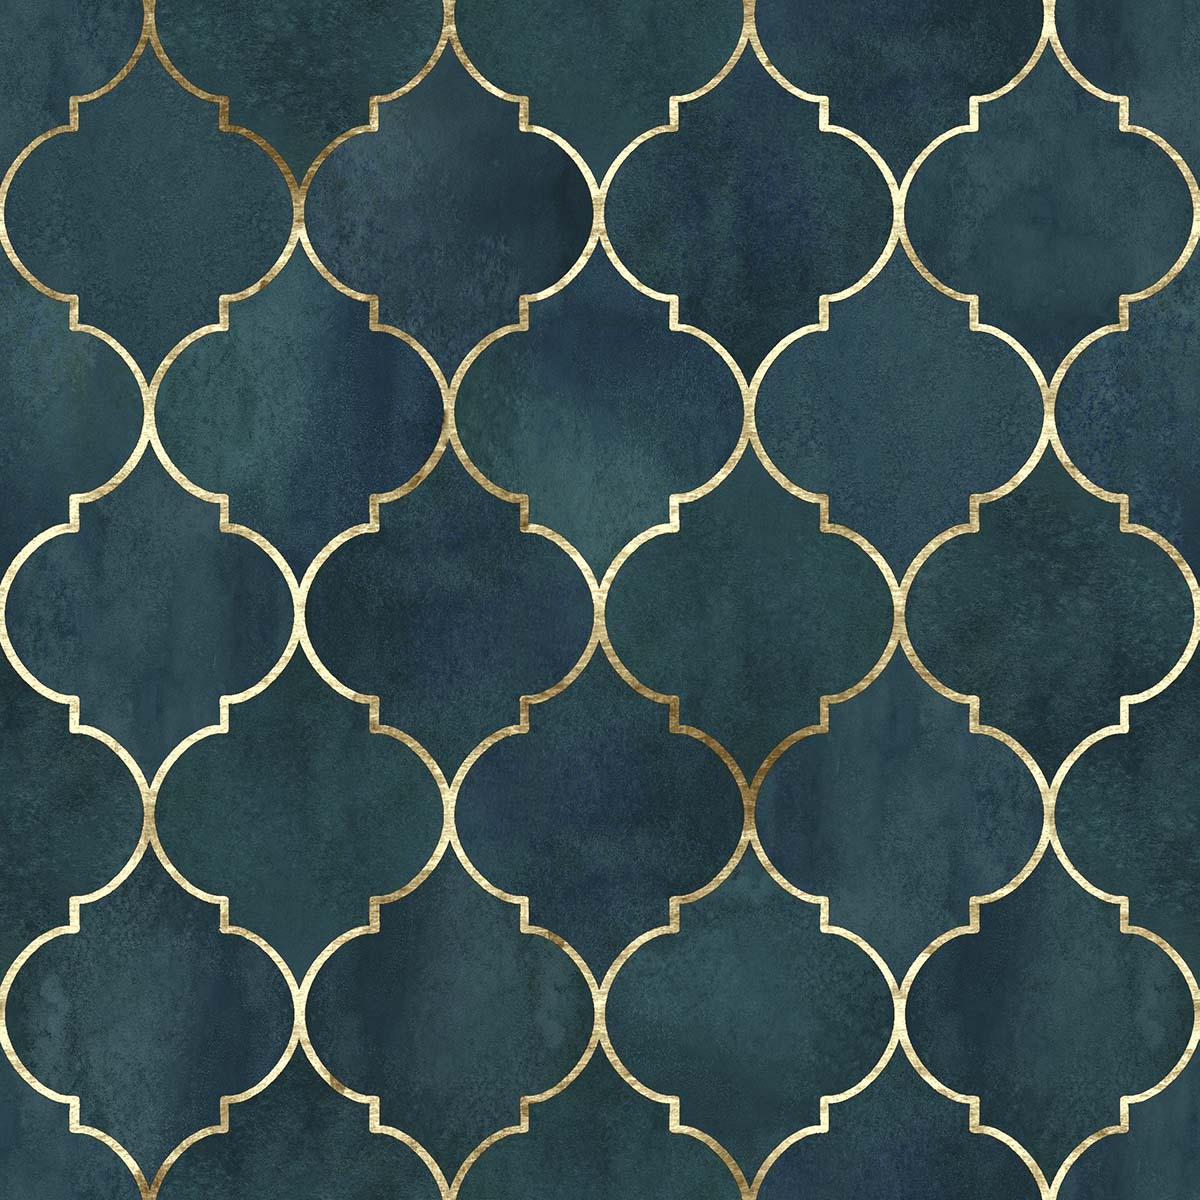 A pattern of gold lines on a blue background